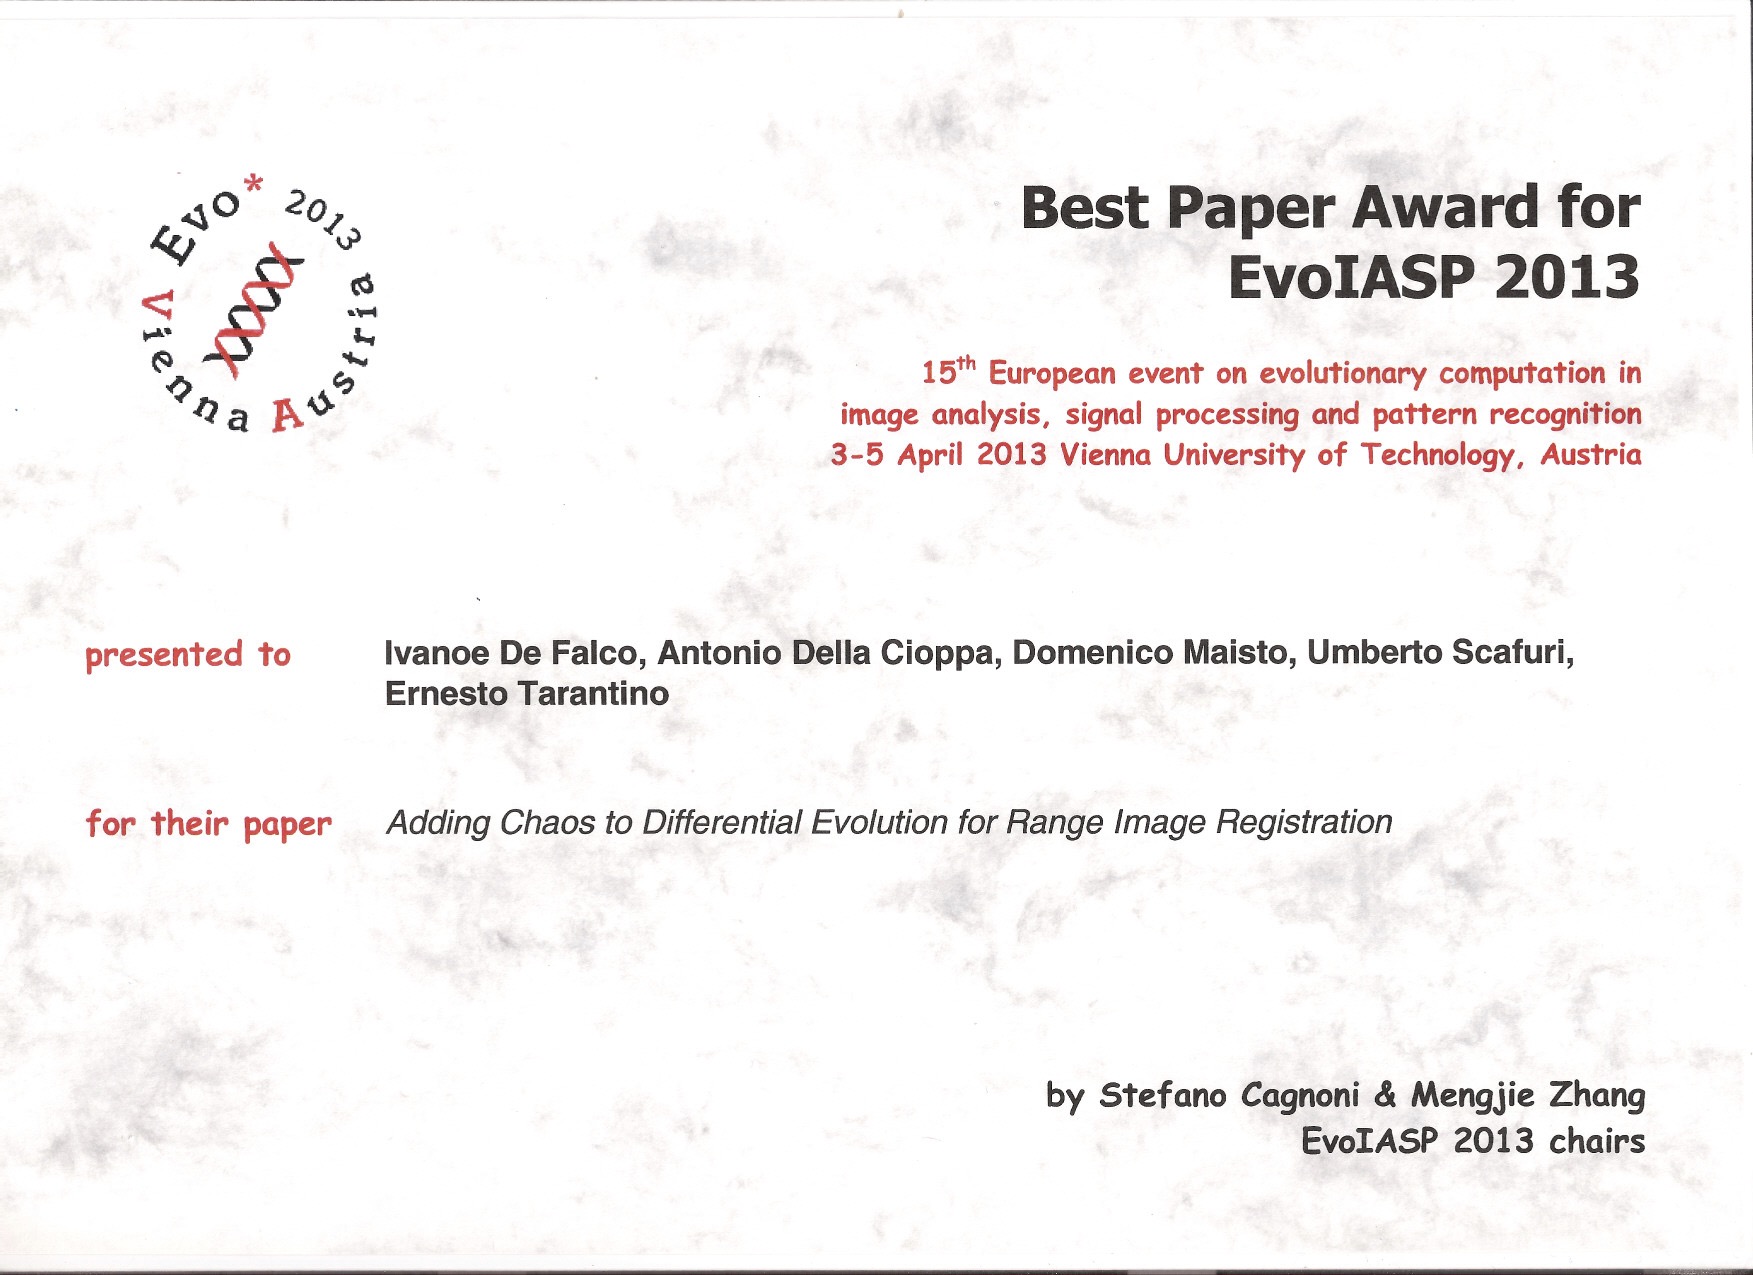 Evoiasp 2013 Best Paper